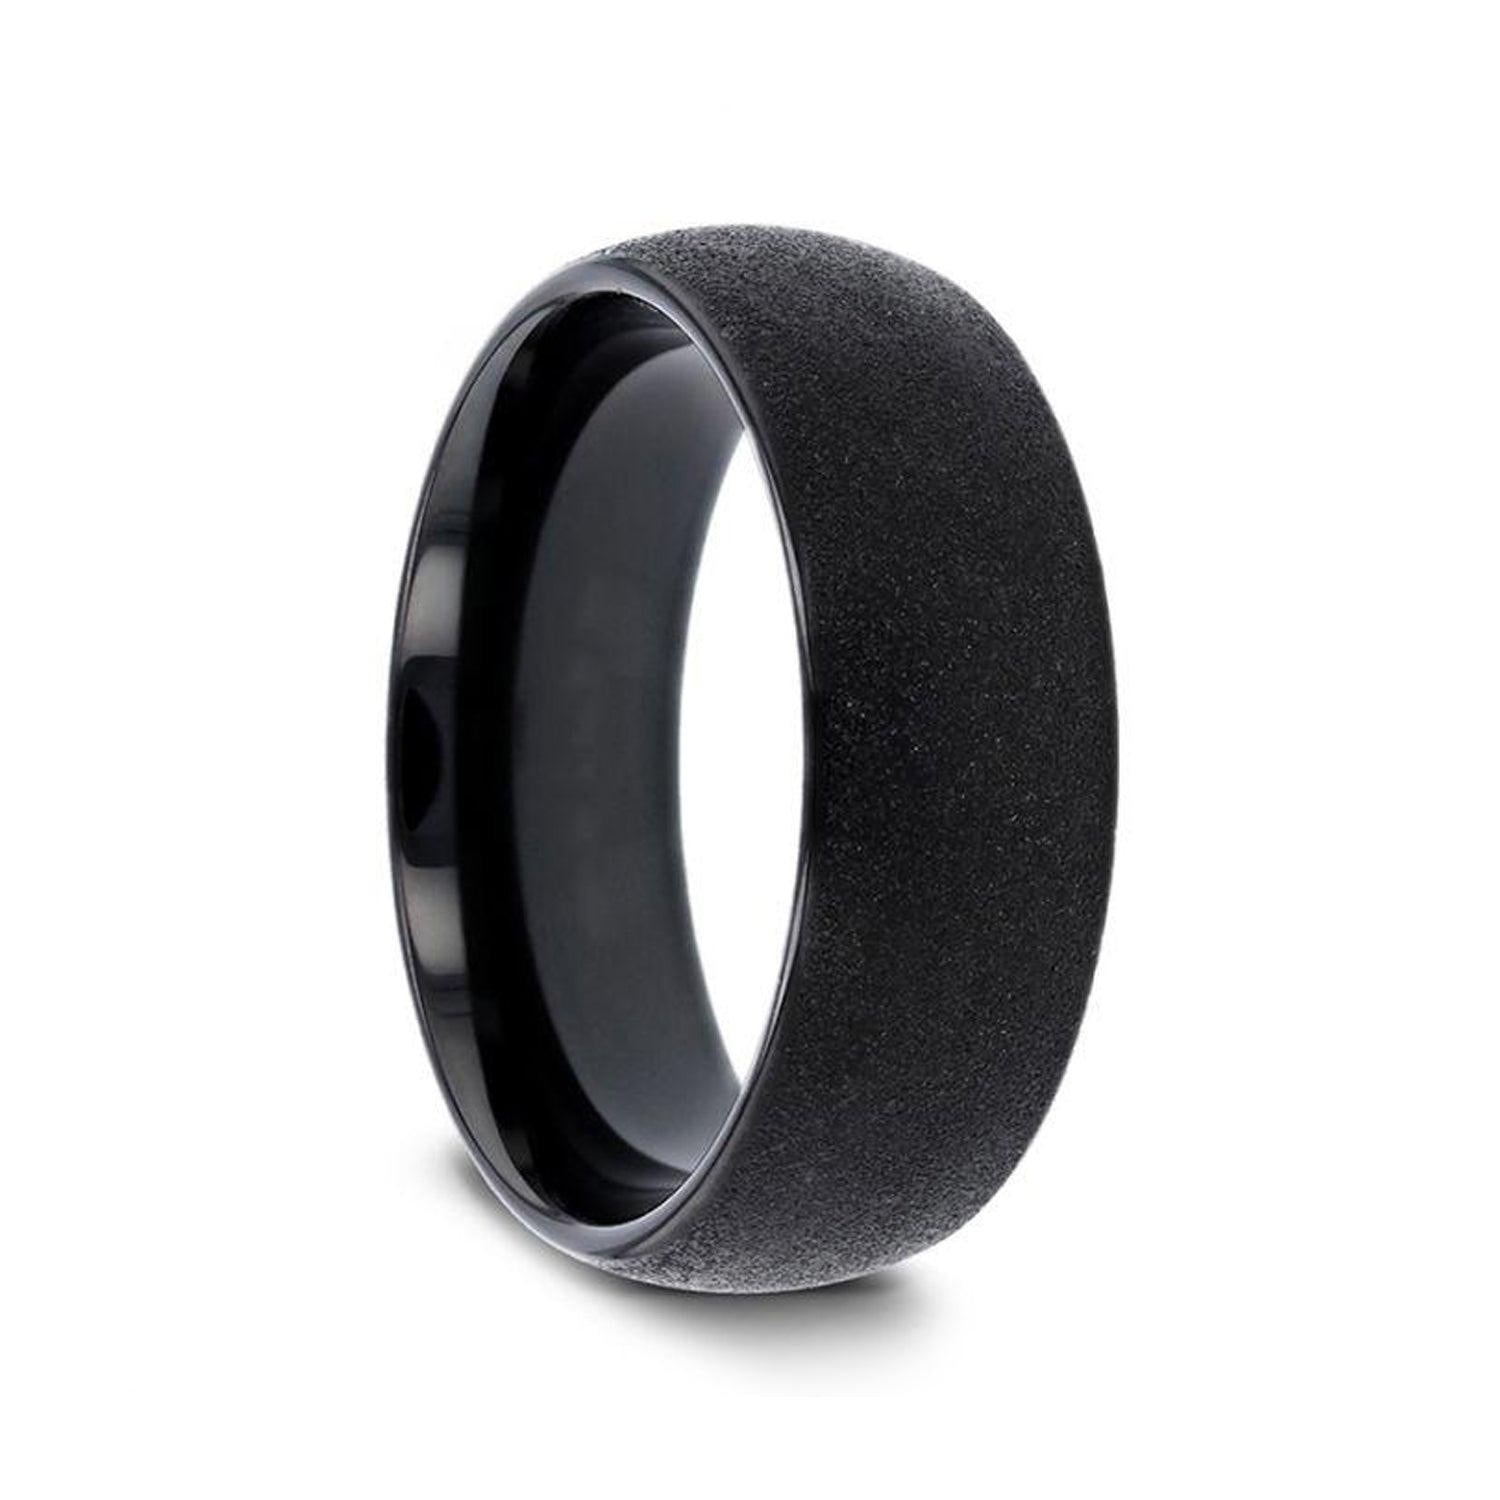 OBSIDIAN - Domed Black Tungsten Carbide Ring with Sandblasted Crystalline Finish - 4mm, 6mm, and 8mm - The Rutile Ltd